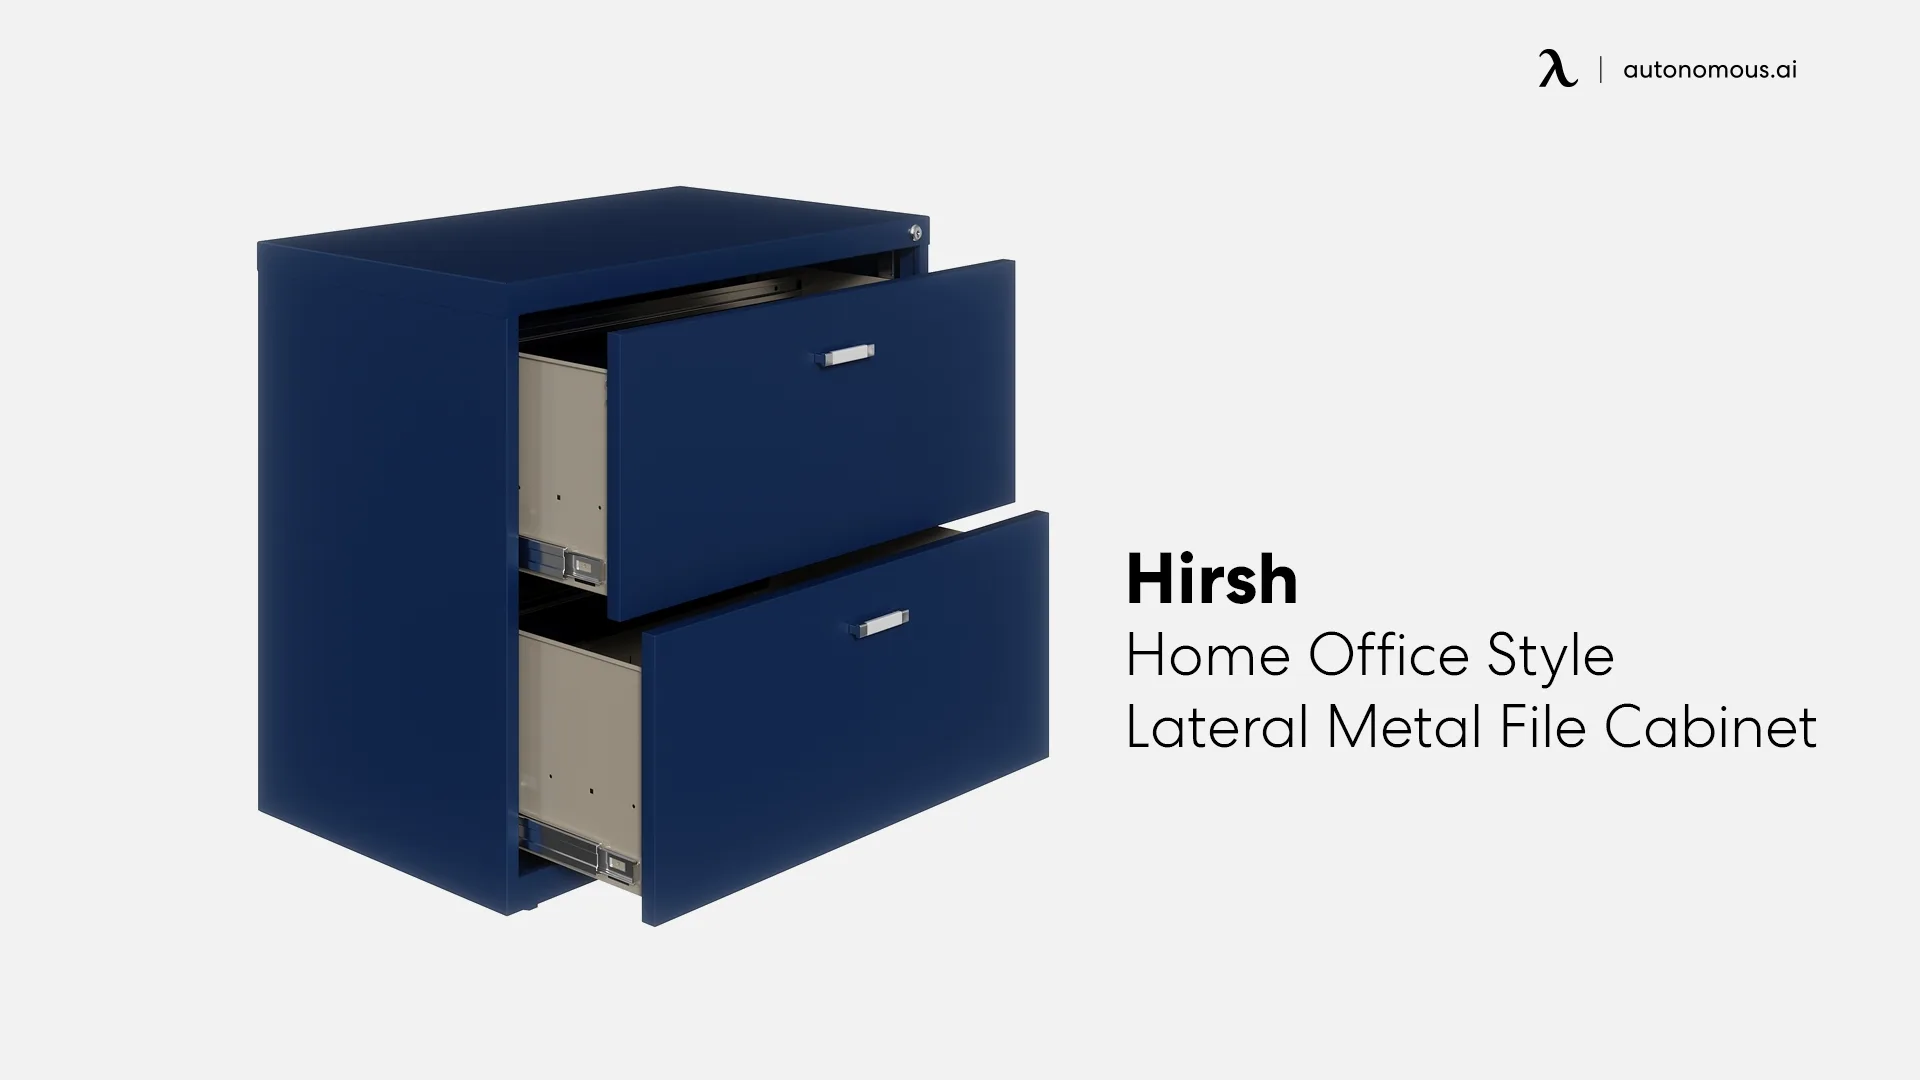 Hirsh Home Office Style Lateral Metal File Cabinet